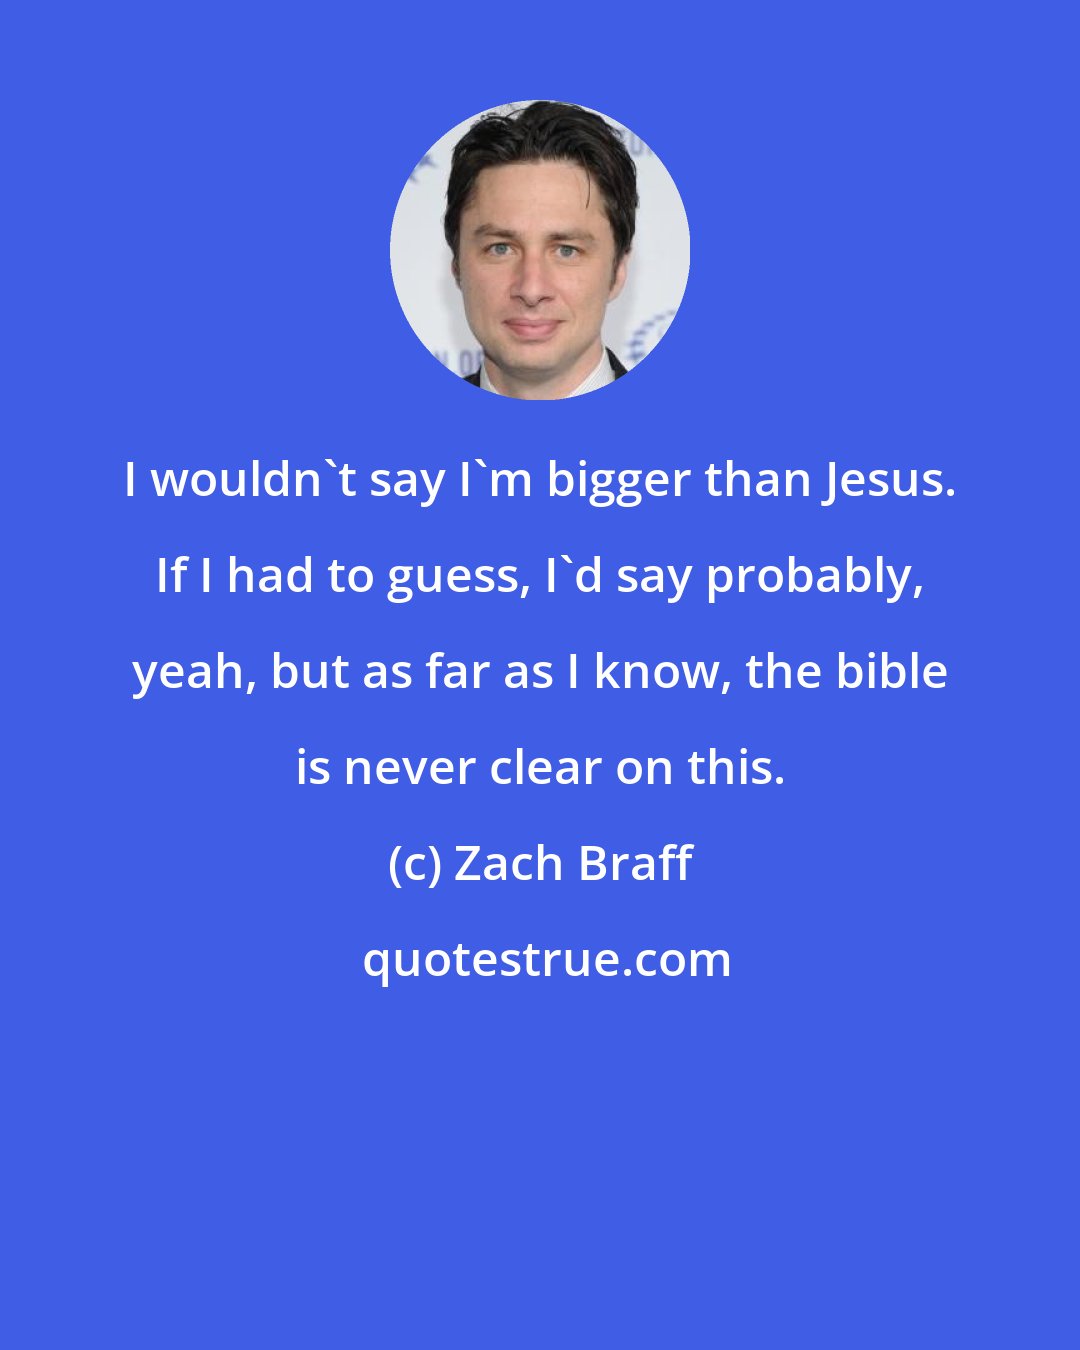 Zach Braff: I wouldn't say I'm bigger than Jesus. If I had to guess, I'd say probably, yeah, but as far as I know, the bible is never clear on this.